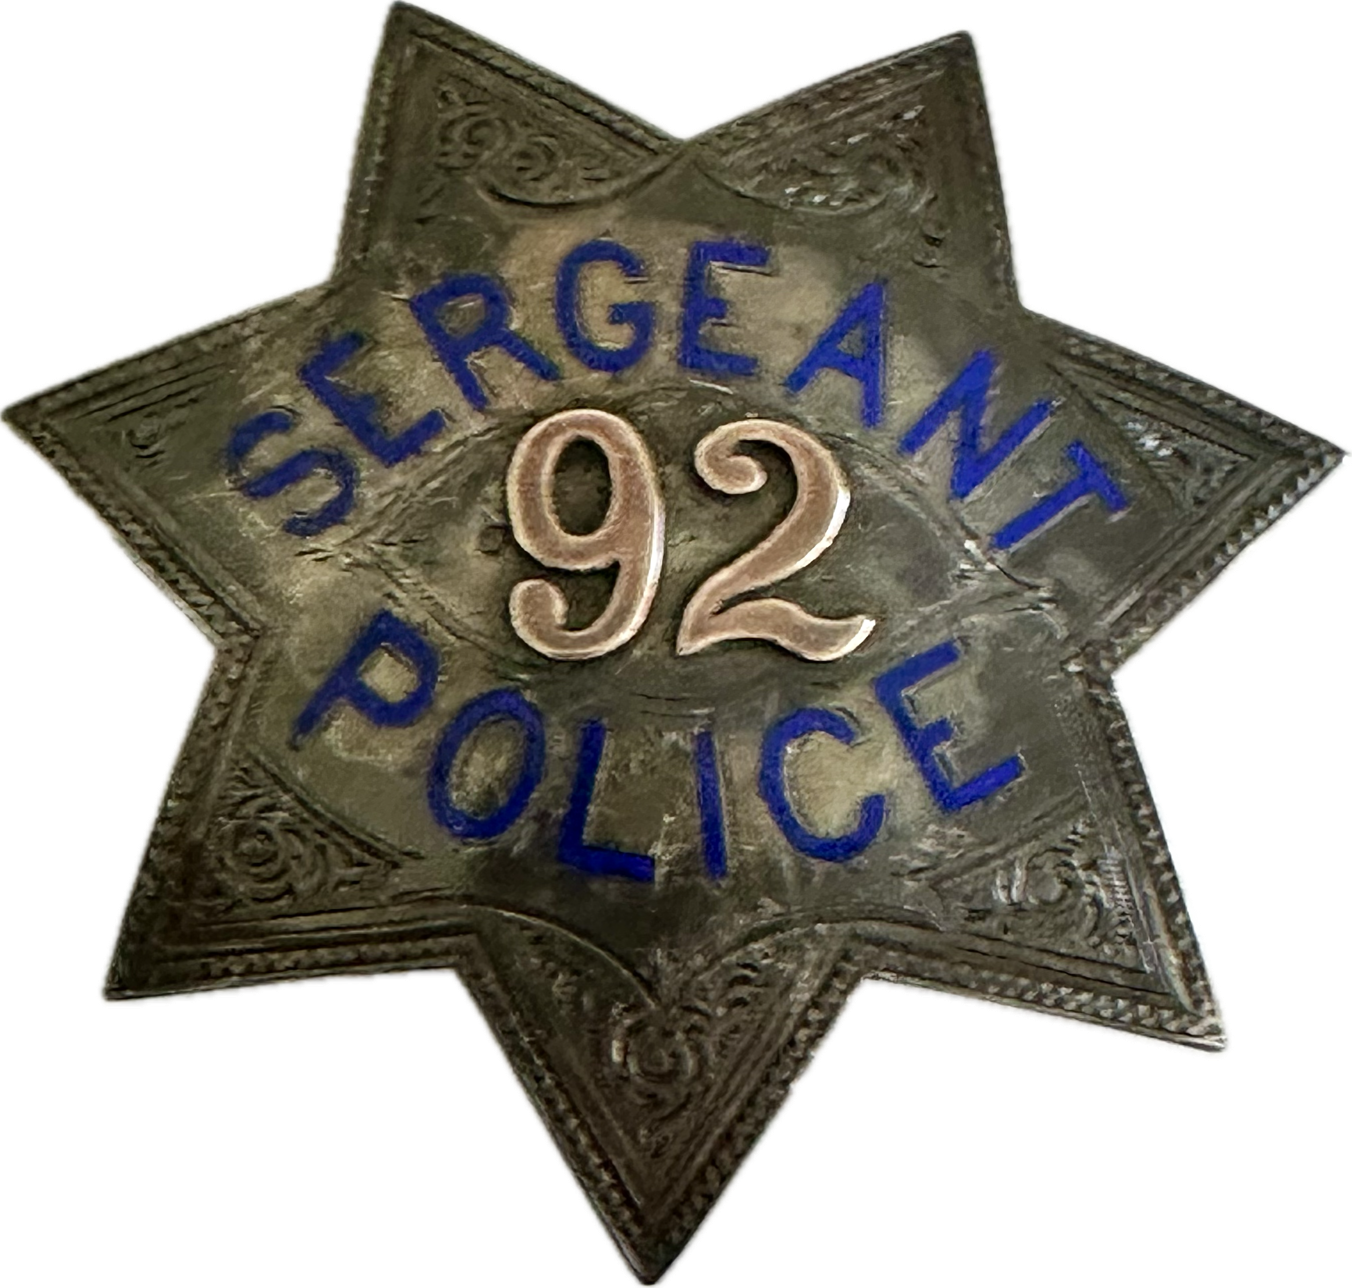 San Francisco Police Sergeant star No. 92 issued to Charles H. McDonald who was appointed a Patrolman on April 14, 1878 and promoted to Sergeant December 1895.  The star is 3 5/16 tall. Sterling silver with hard fired blue enamel lettering and 14k applied gold numbers.